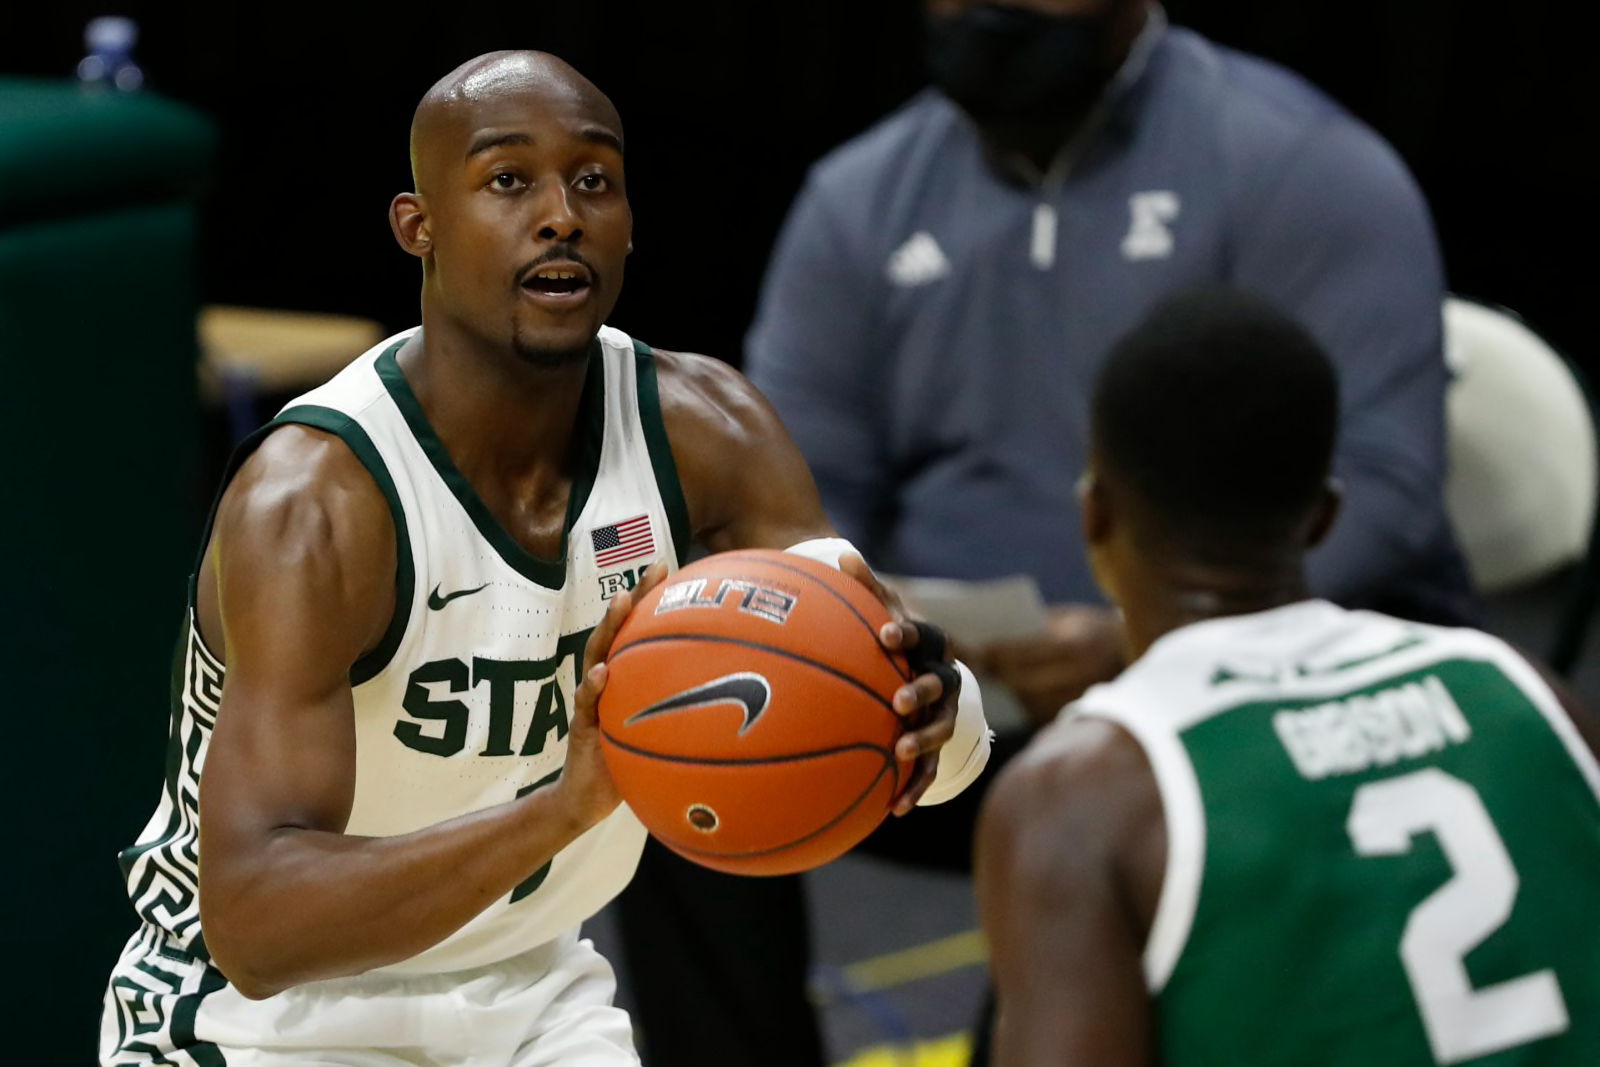 Michigan State Basketball: 3 takeaways from win over Eastern Michigan